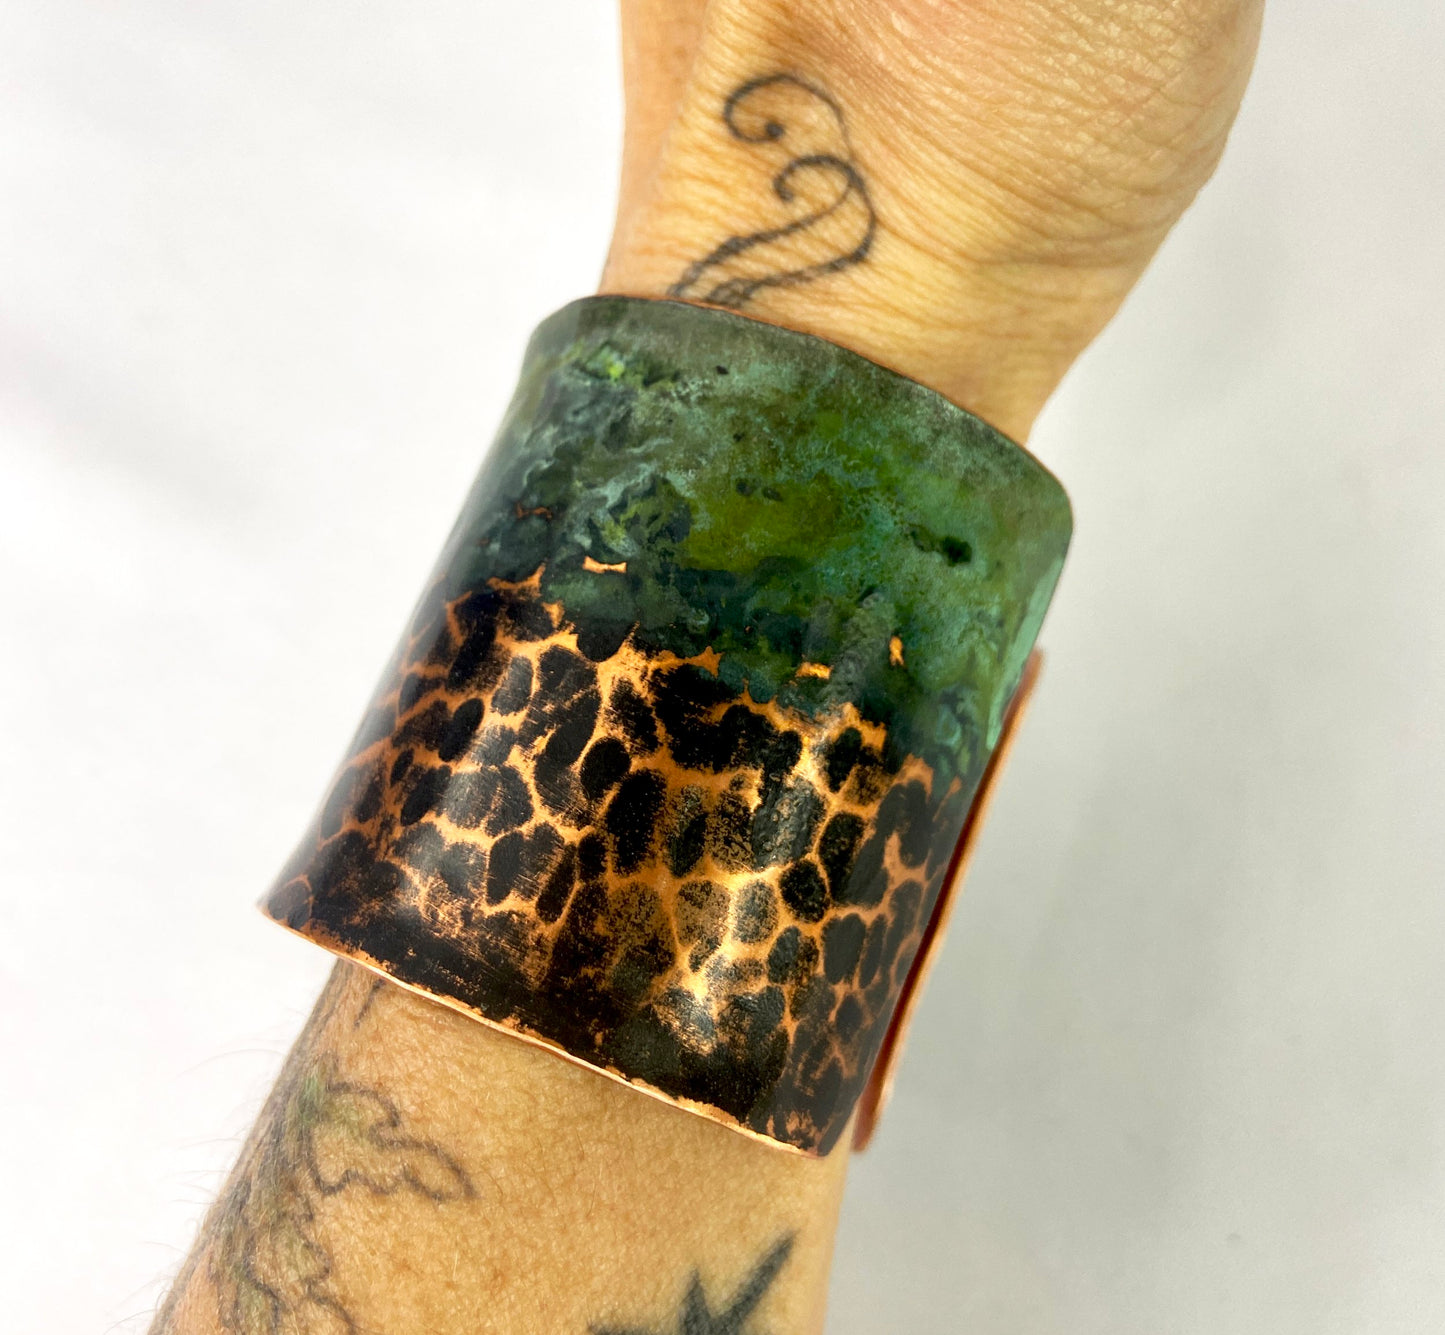 Hammered Copper Cuff Bracelet with Antique and Green